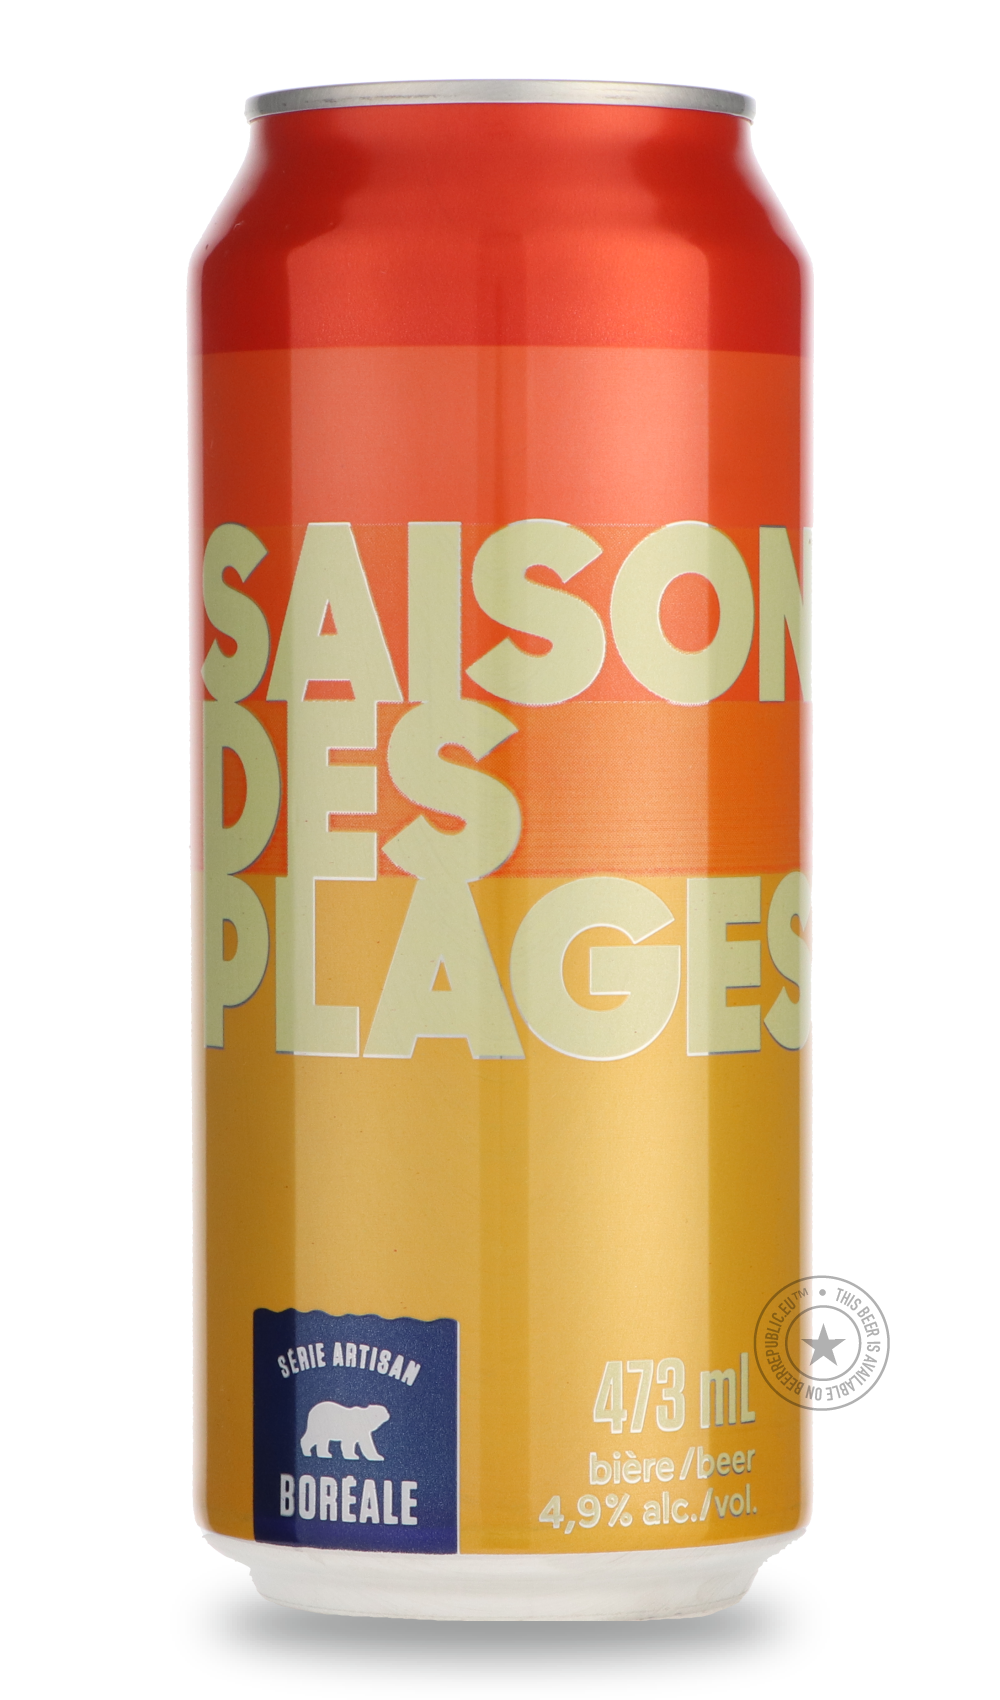 -Boréale- Saison des Plages-Pale- Only @ Beer Republic - The best online beer store for American & Canadian craft beer - Buy beer online from the USA and Canada - Bier online kopen - Amerikaans bier kopen - Craft beer store - Craft beer kopen - Amerikanisch bier kaufen - Bier online kaufen - Acheter biere online - IPA - Stout - Porter - New England IPA - Hazy IPA - Imperial Stout - Barrel Aged - Barrel Aged Imperial Stout - Brown - Dark beer - Blond - Blonde - Pilsner - Lager - Wheat - Weizen - Amber - Barl